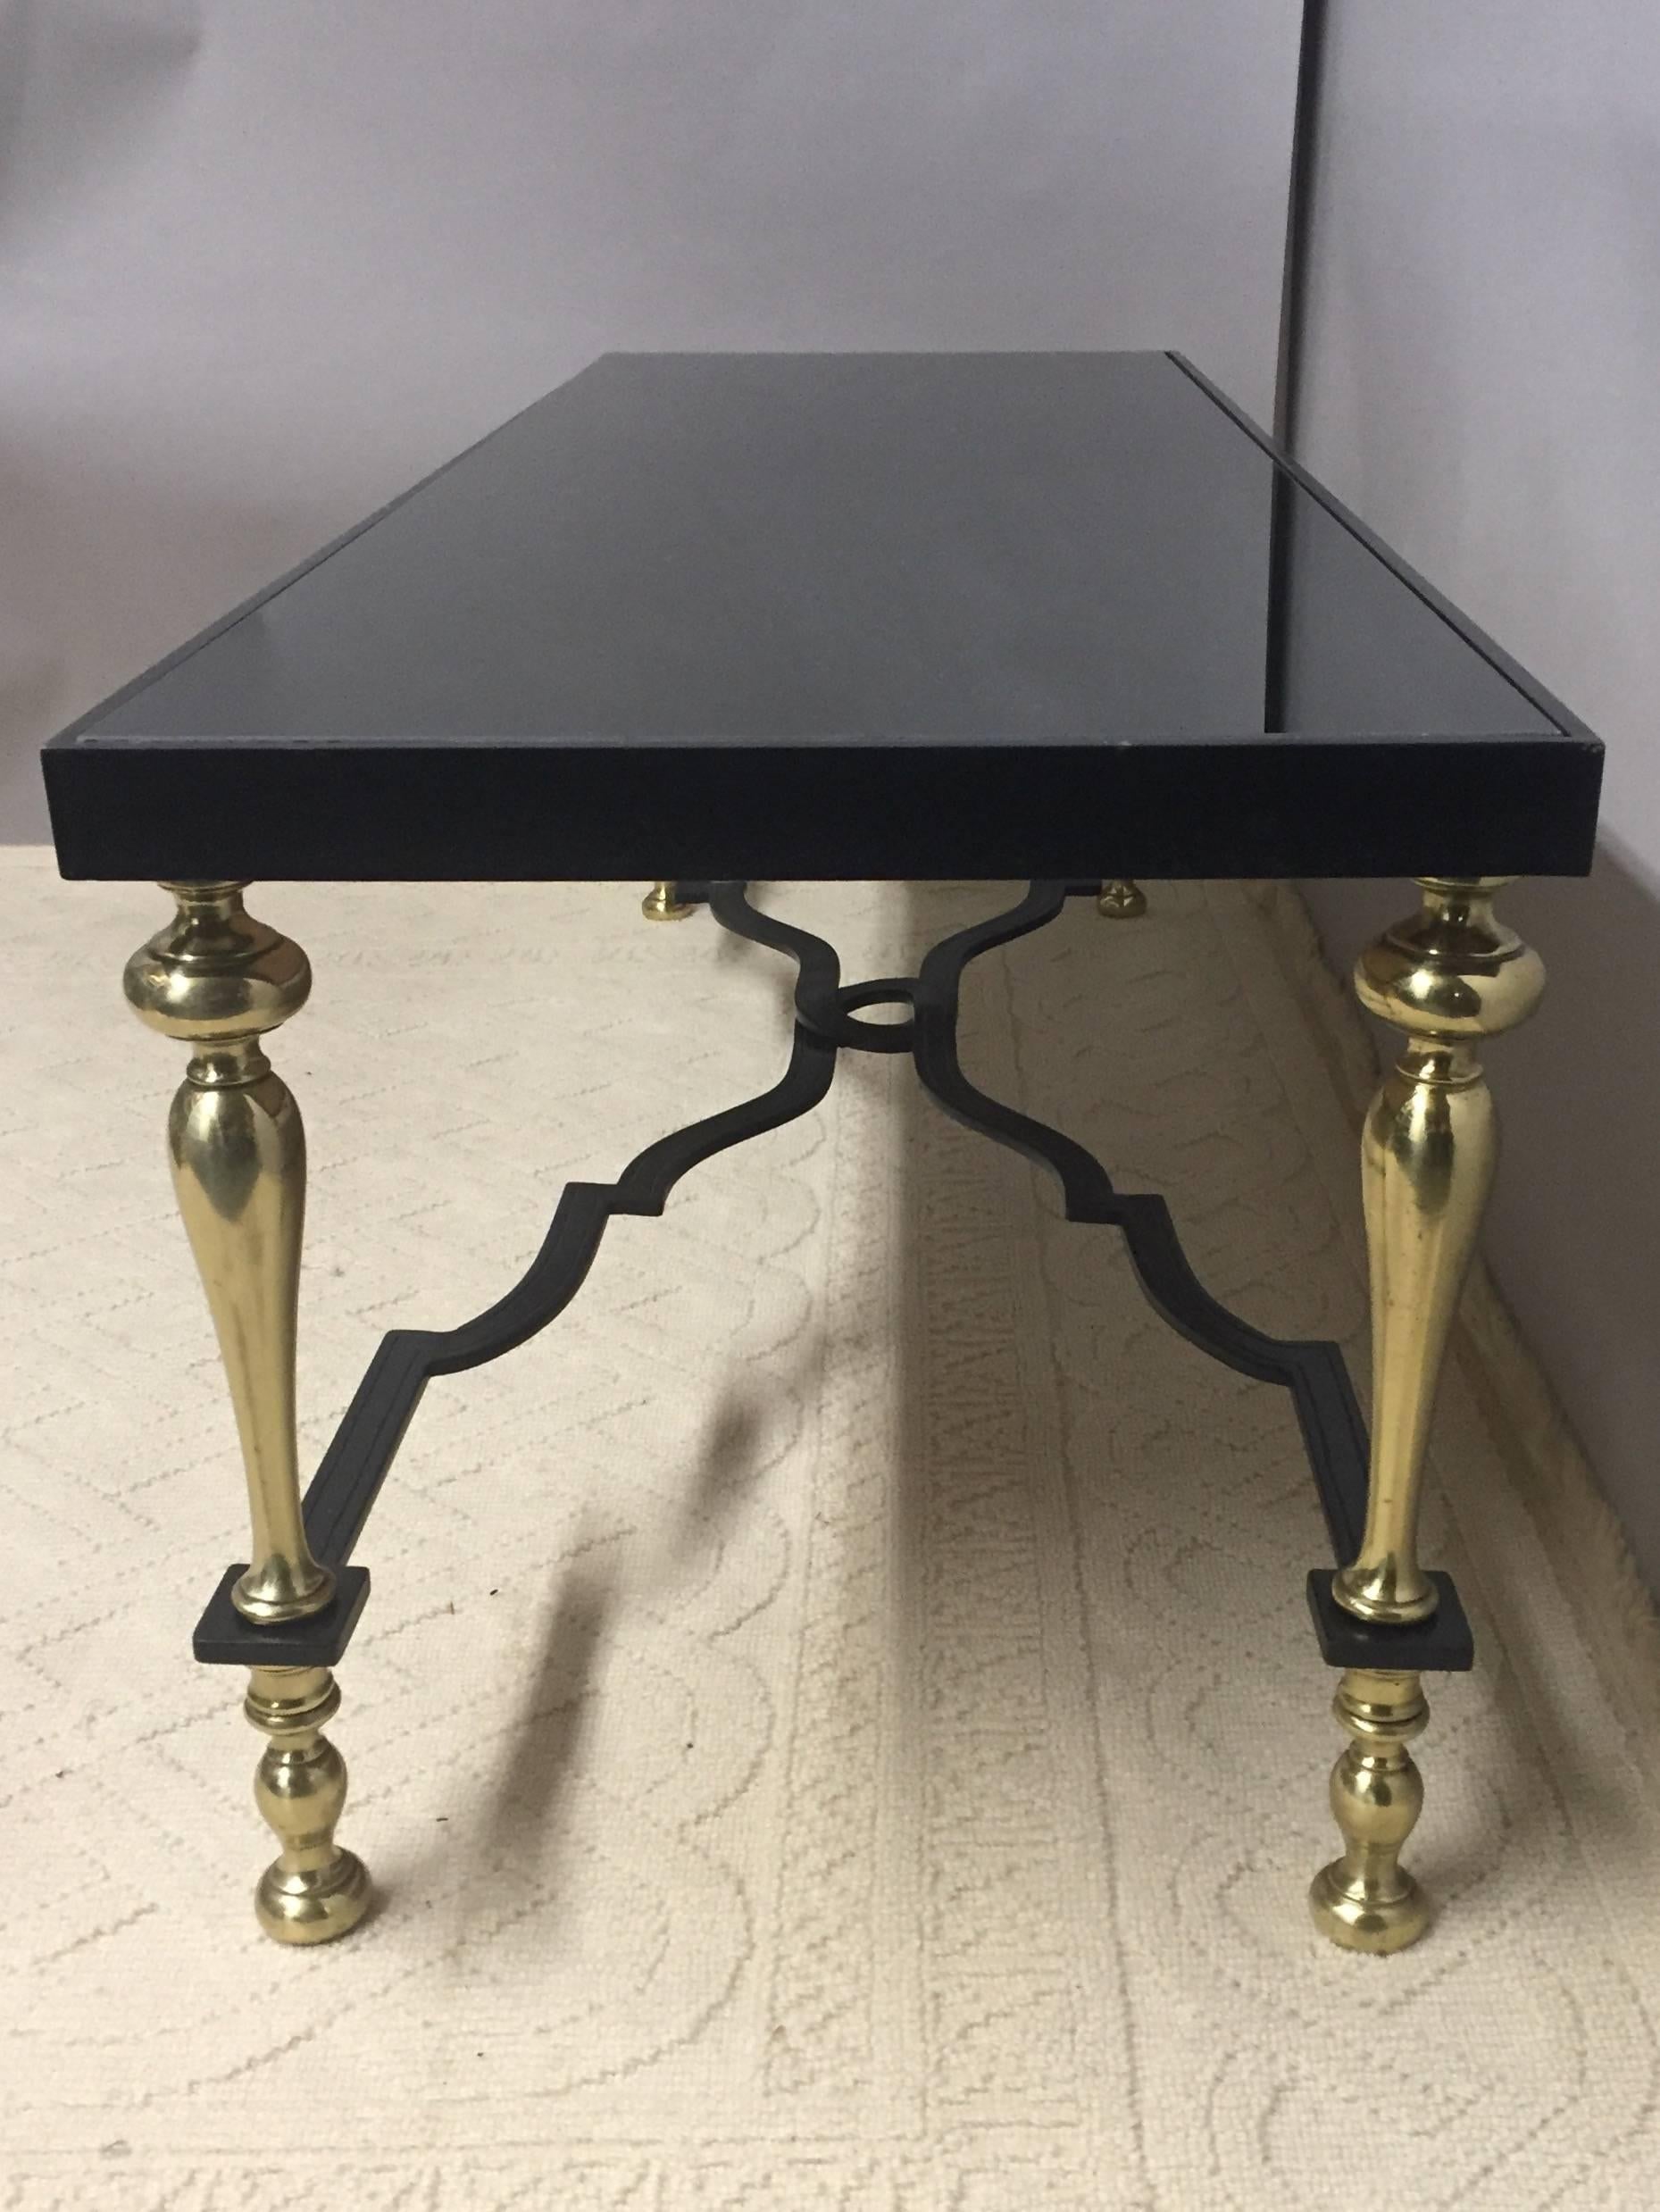 Neoclassical Sleek Brass, Wrought Iron and Mirrored Coffee Table